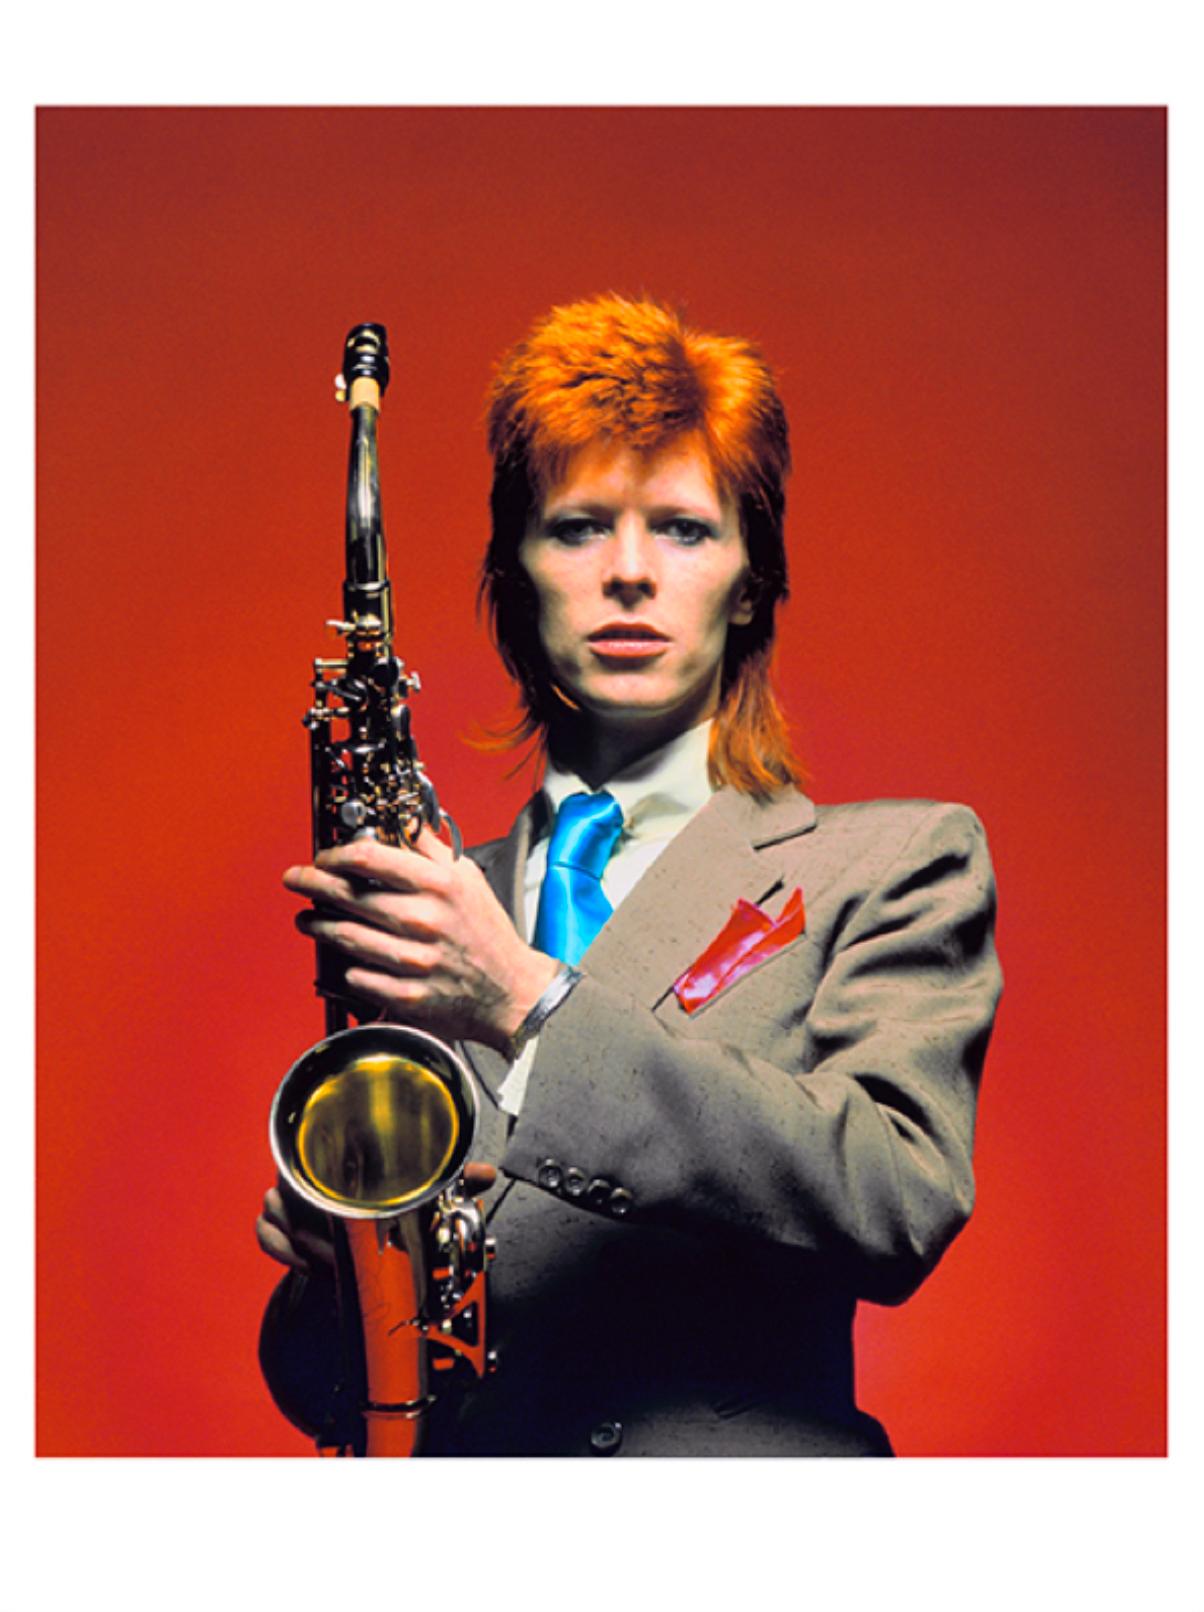 David Bowie with Saxophone (Framed) hand signed limited edition  - Photograph by Mick Rock